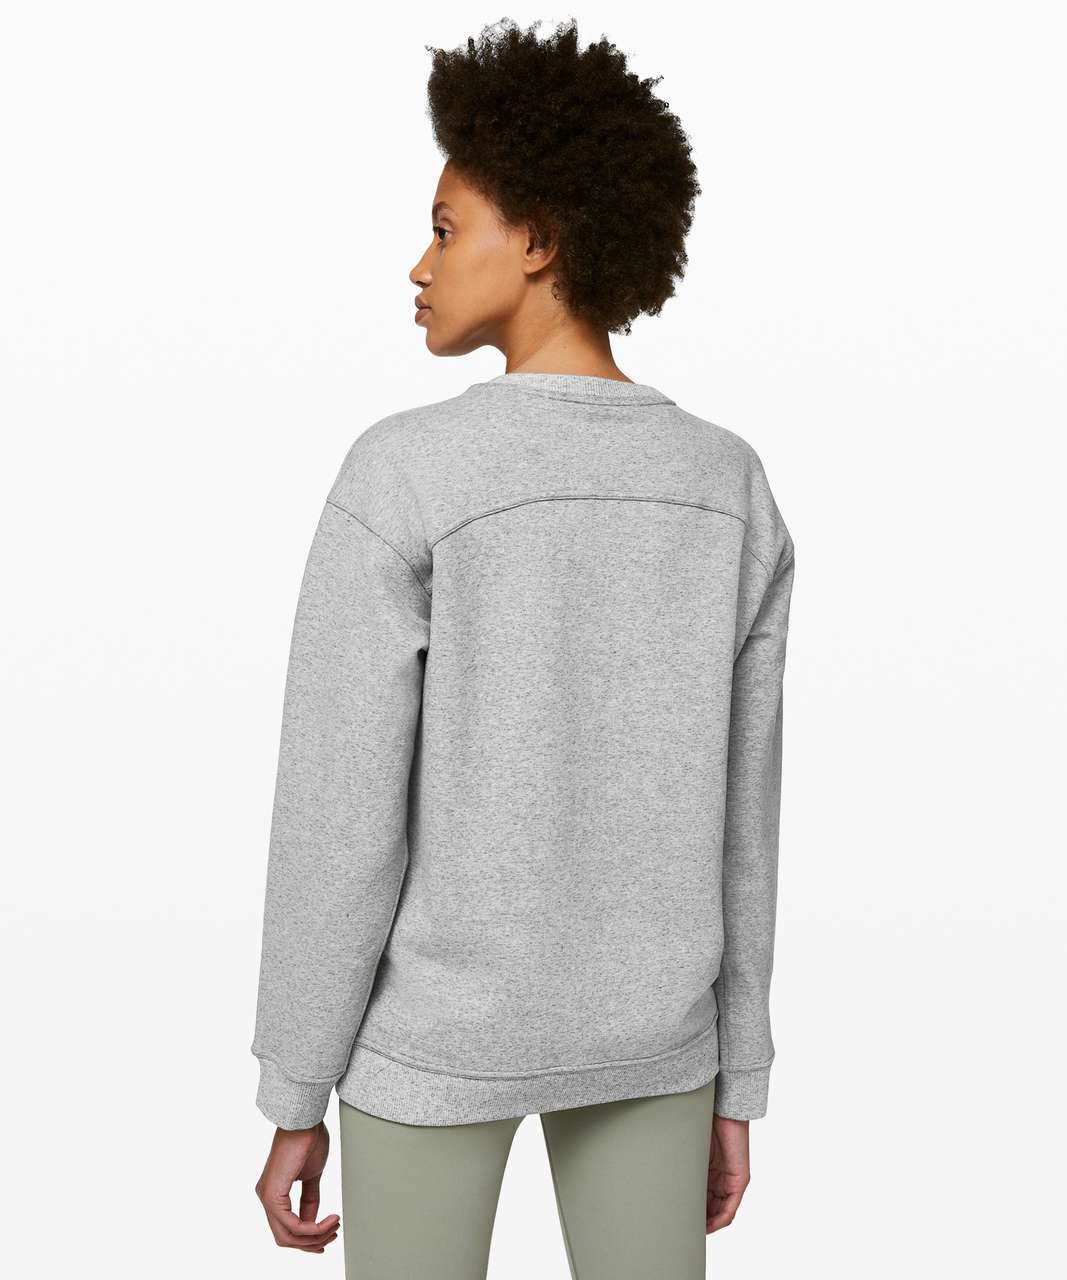 Lululemon All Yours Crew - Heathered Core Light Grey / Silver Drop